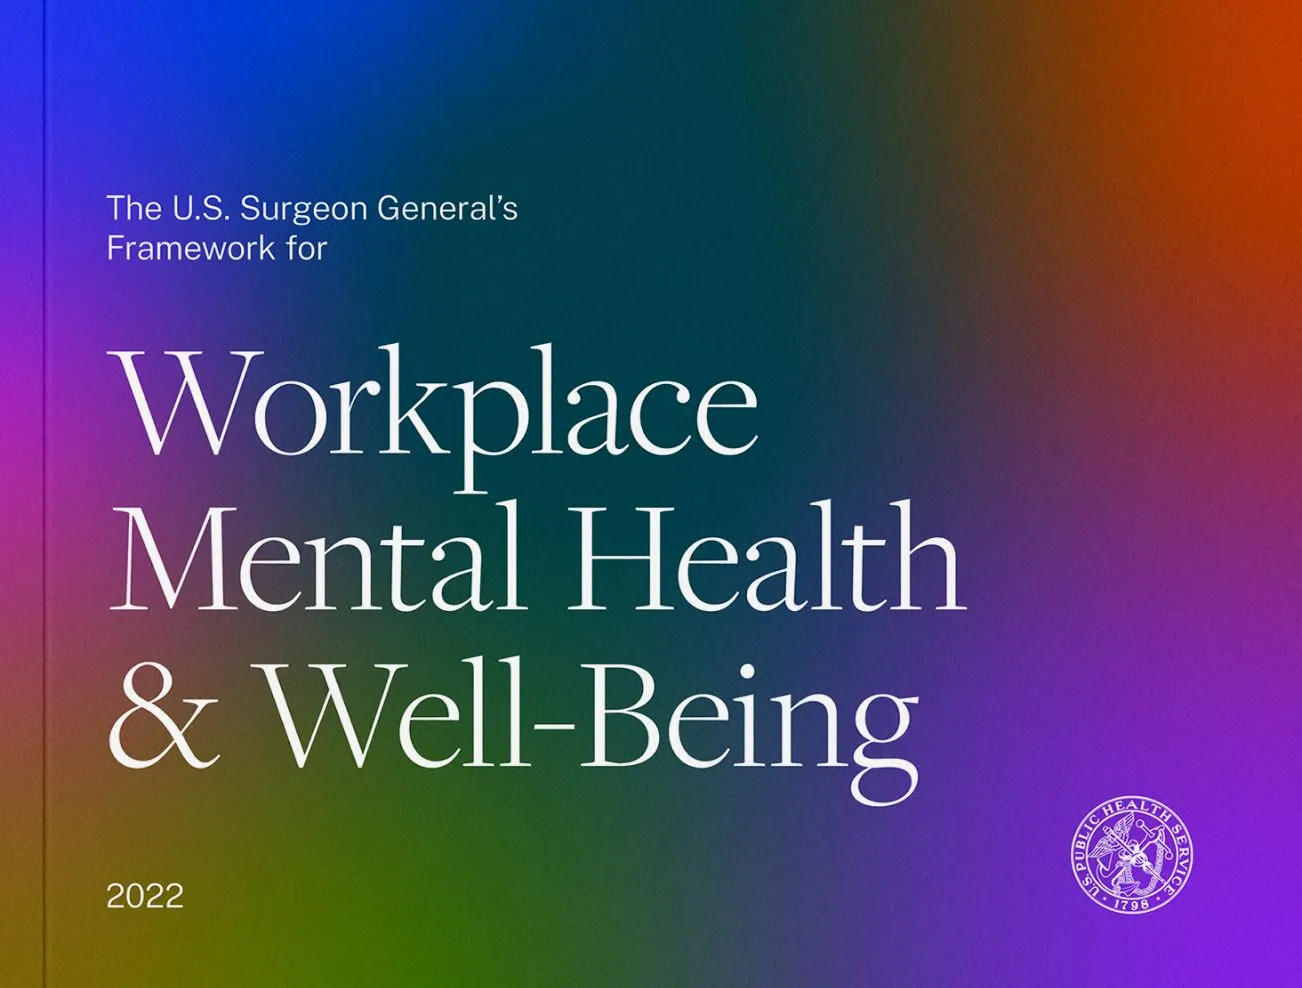 Cover image of the framework, The U.S. Surgeon General's Framework for Workplace Mental Health and Well-Being (2022)